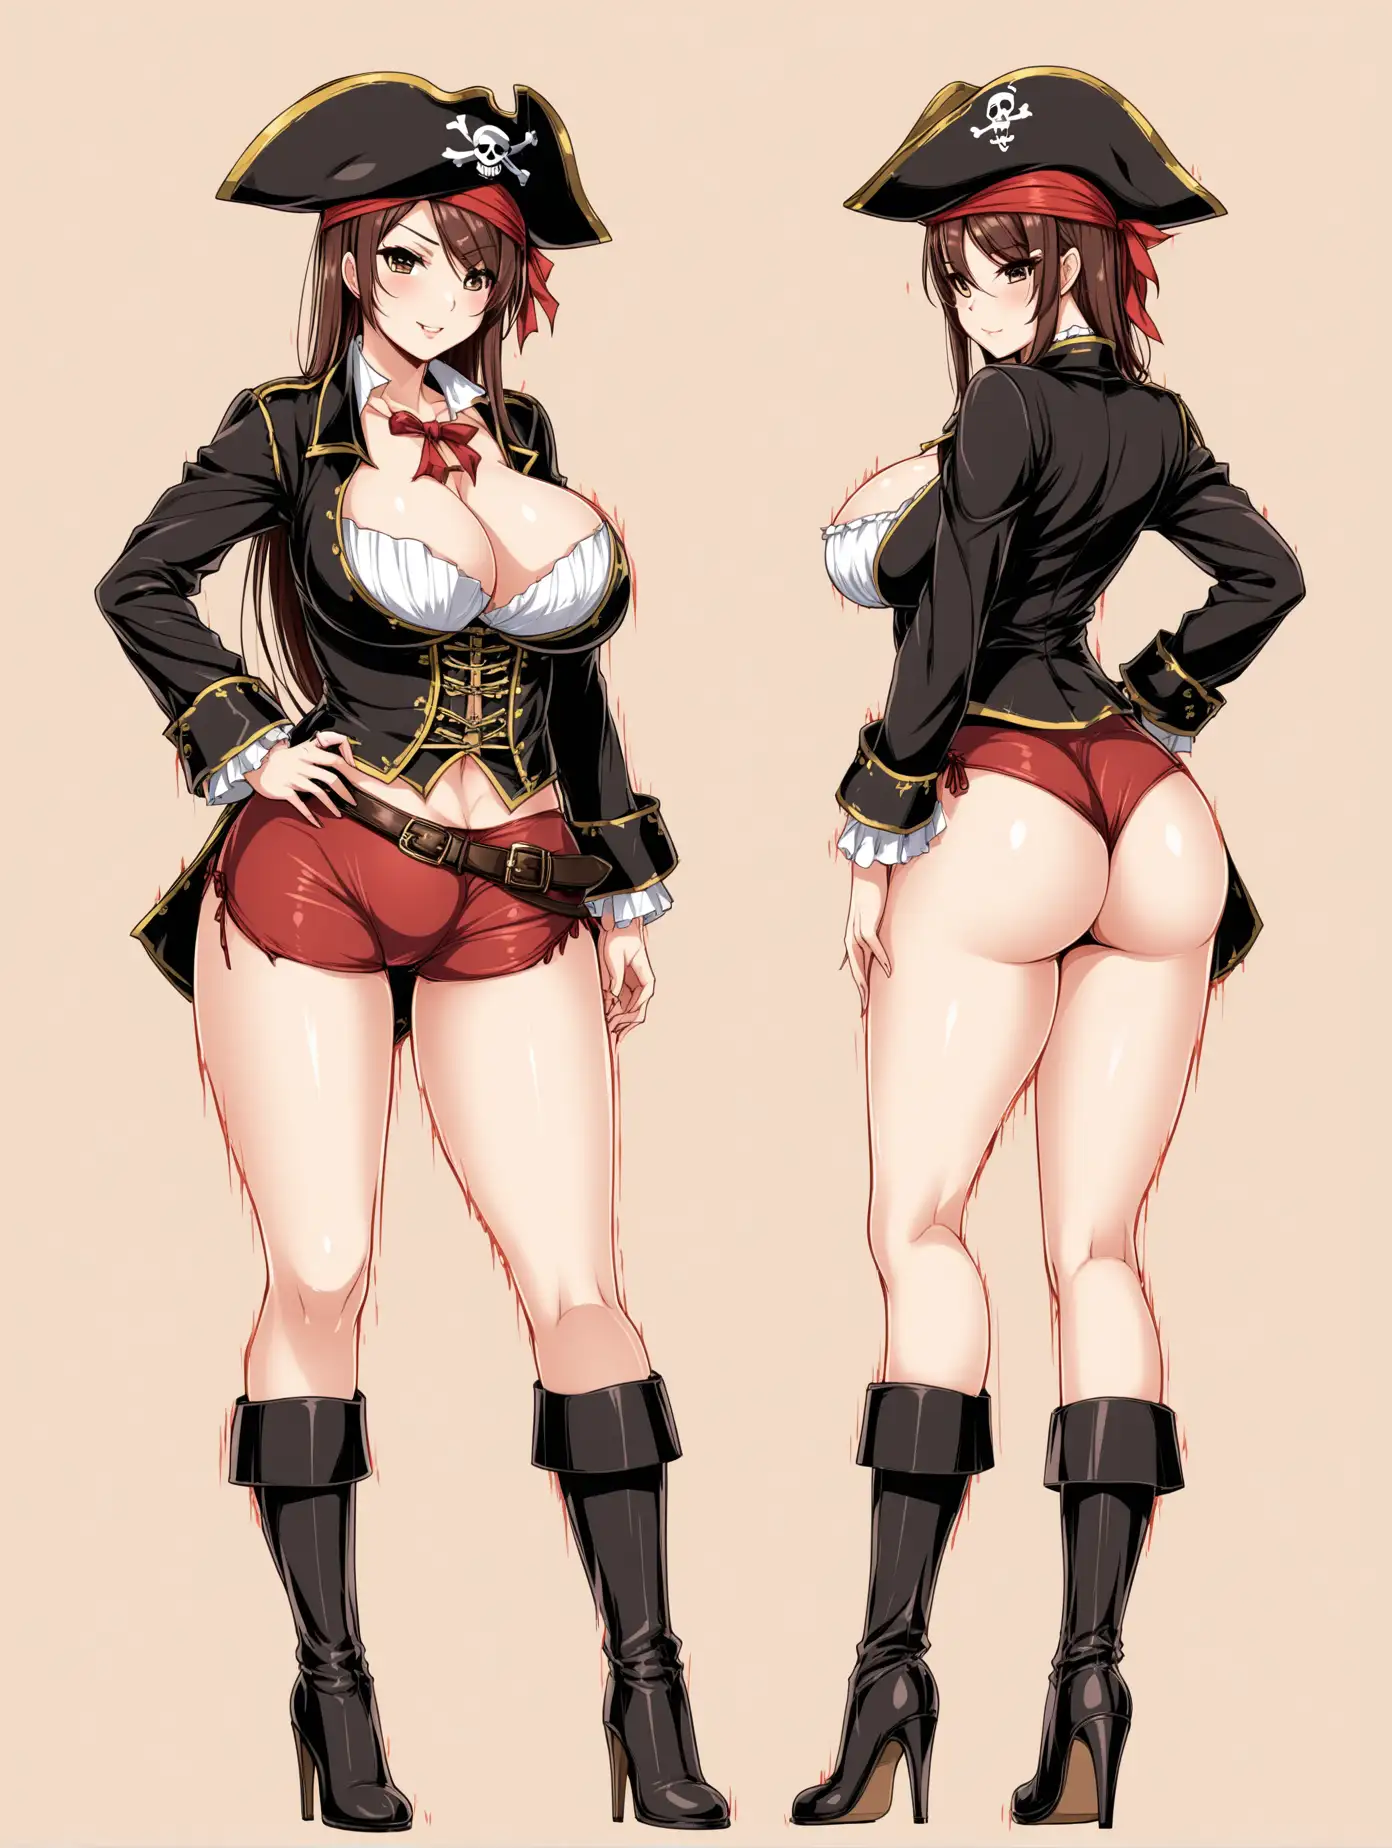 Seductive-Pirate-Anime-Girl-in-Sensual-Poses-with-Busty-Features